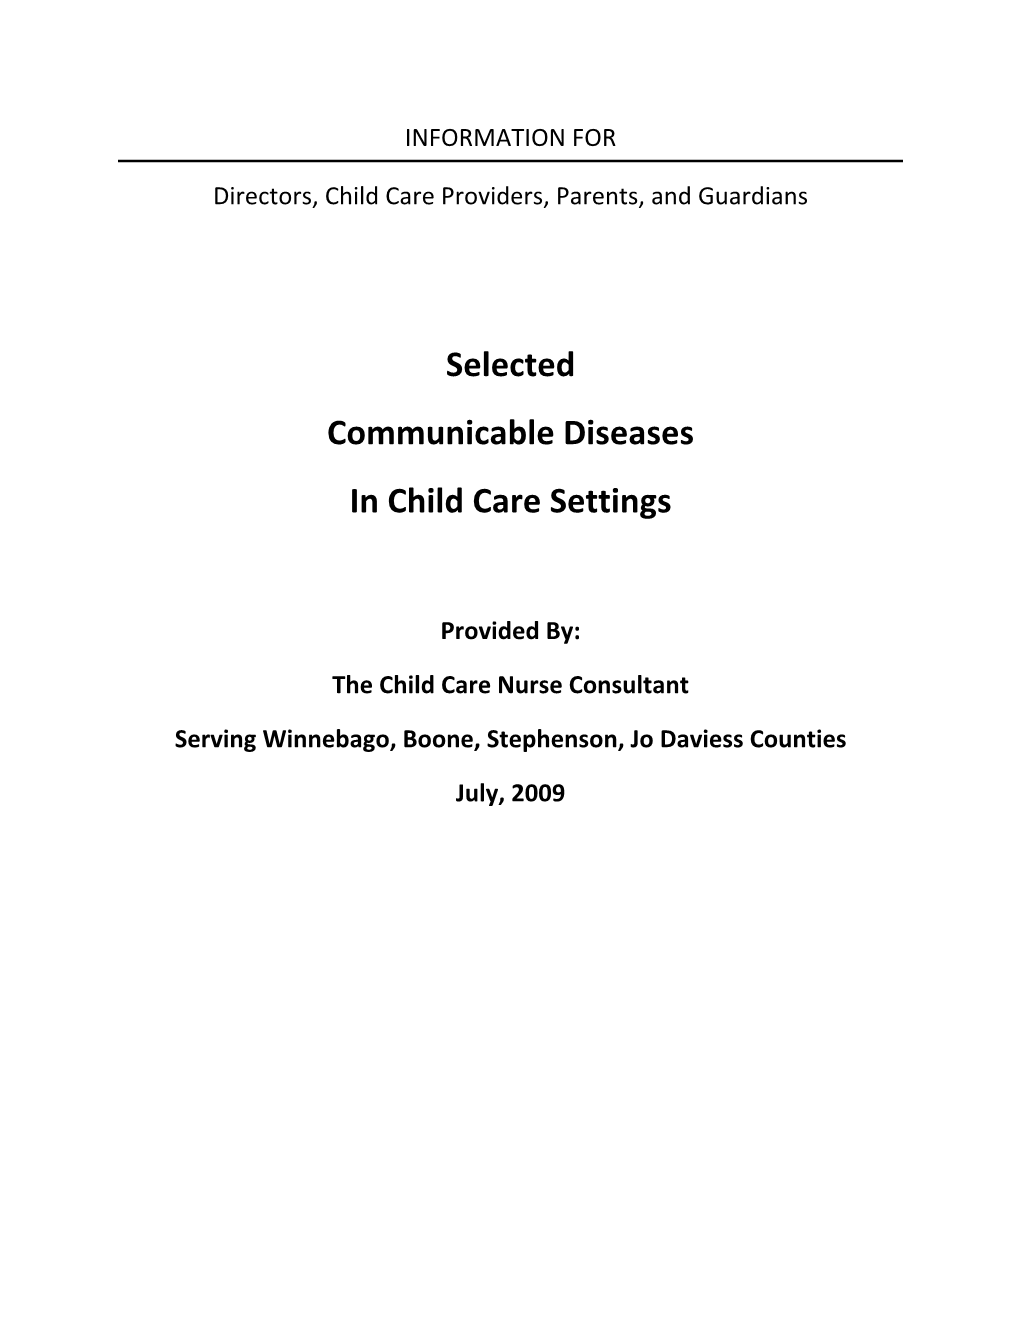 Selected Communicable Diseases in Child Care Settings